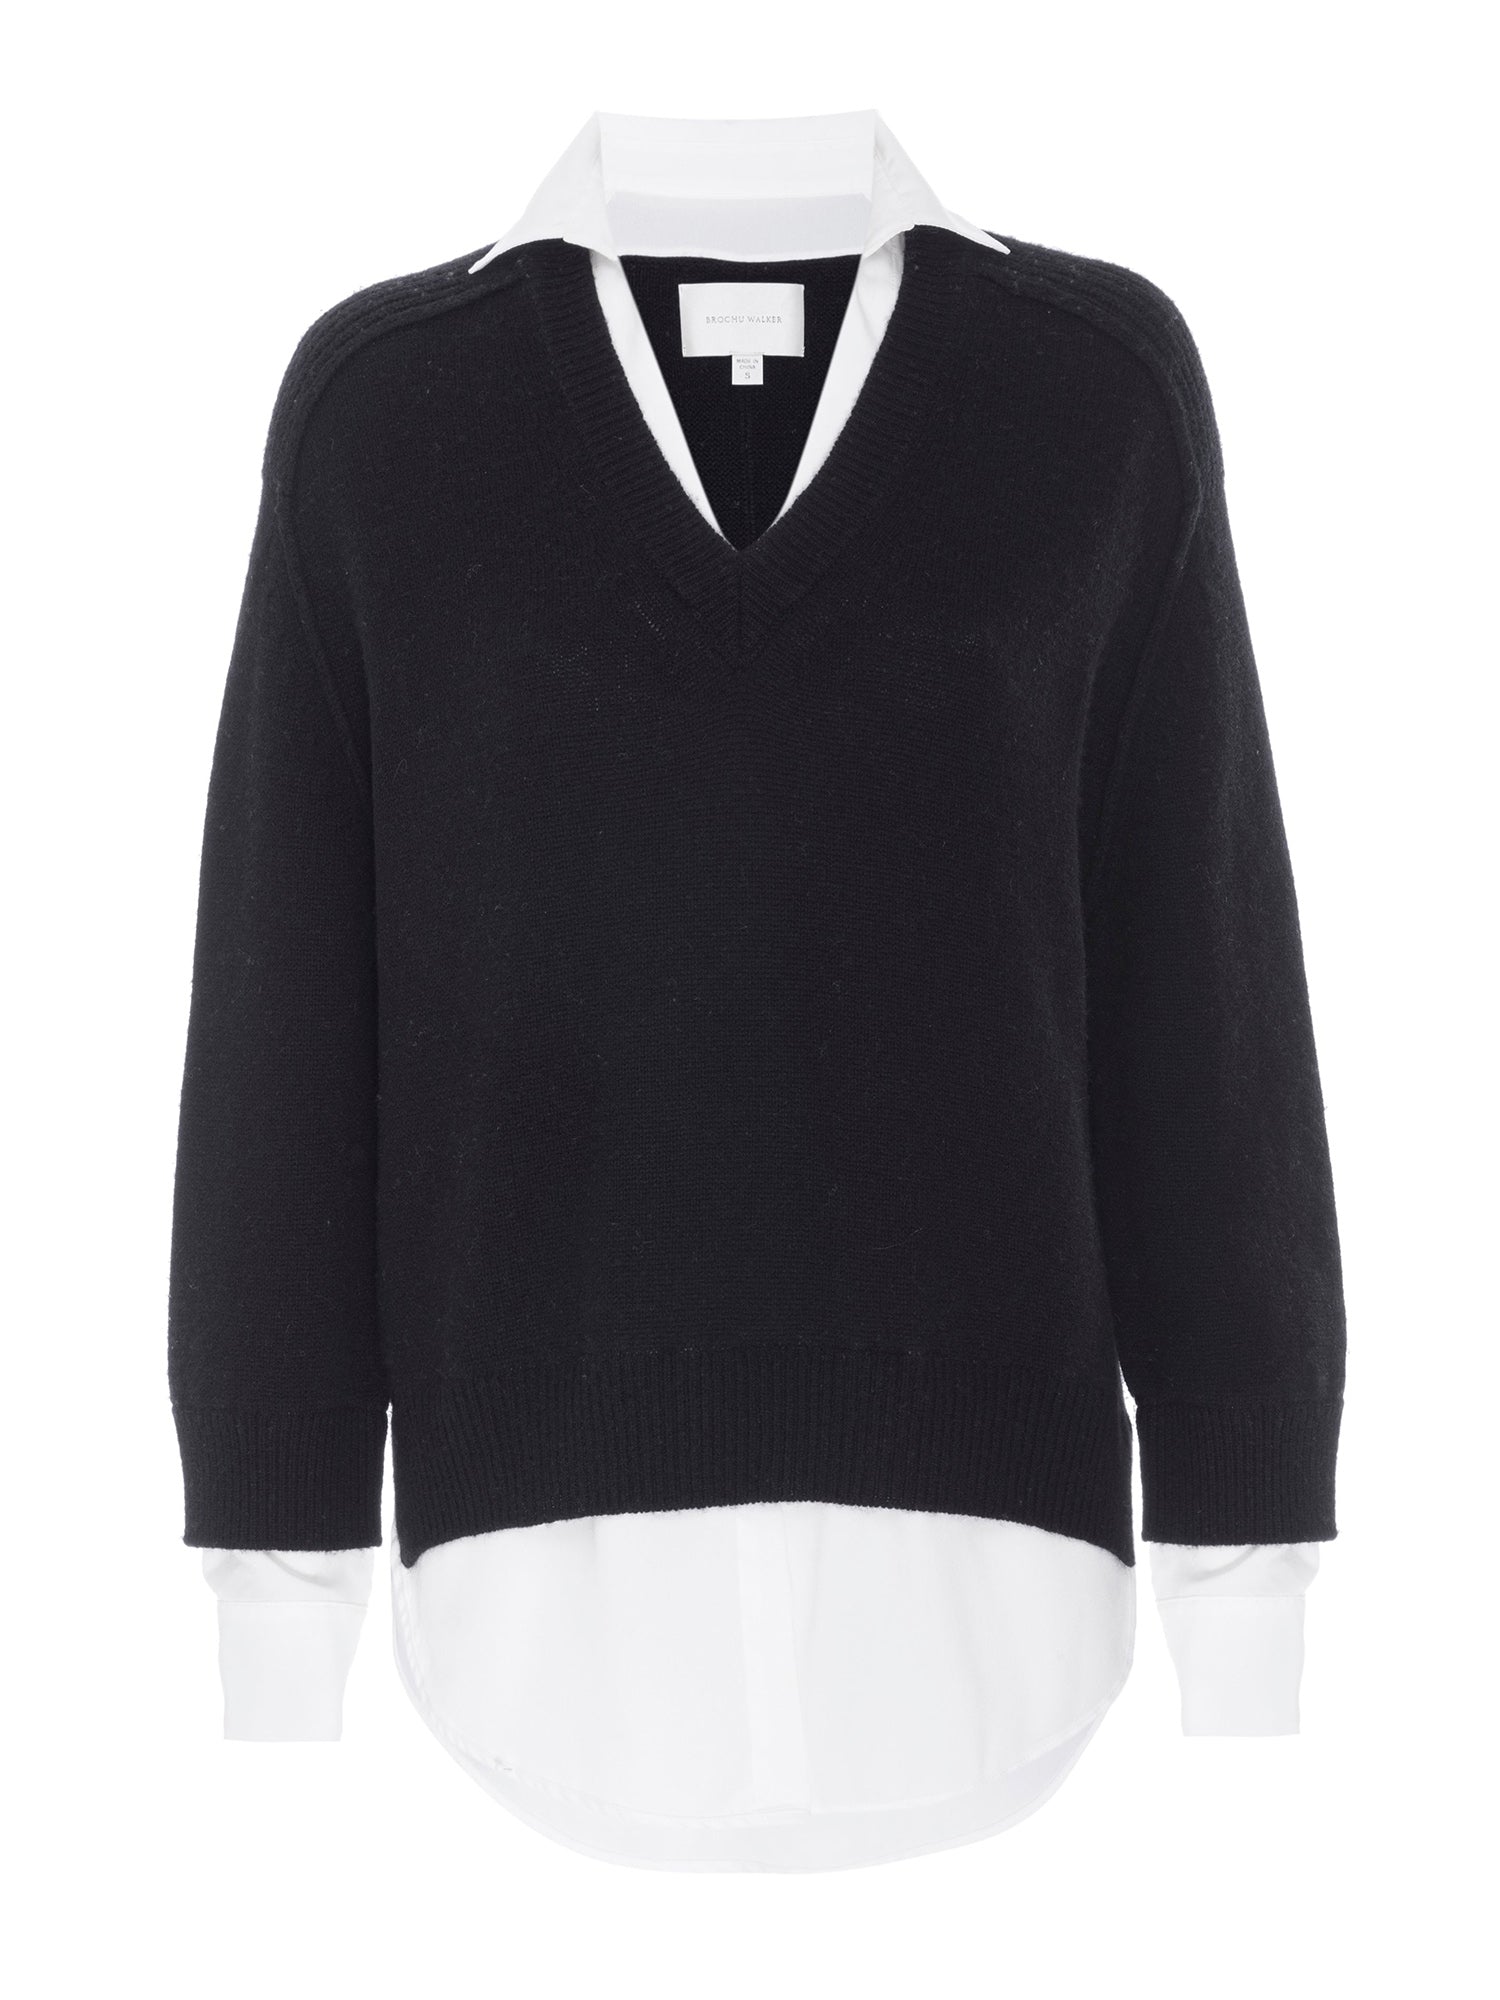 Looker black layered v-neck sweater flat view